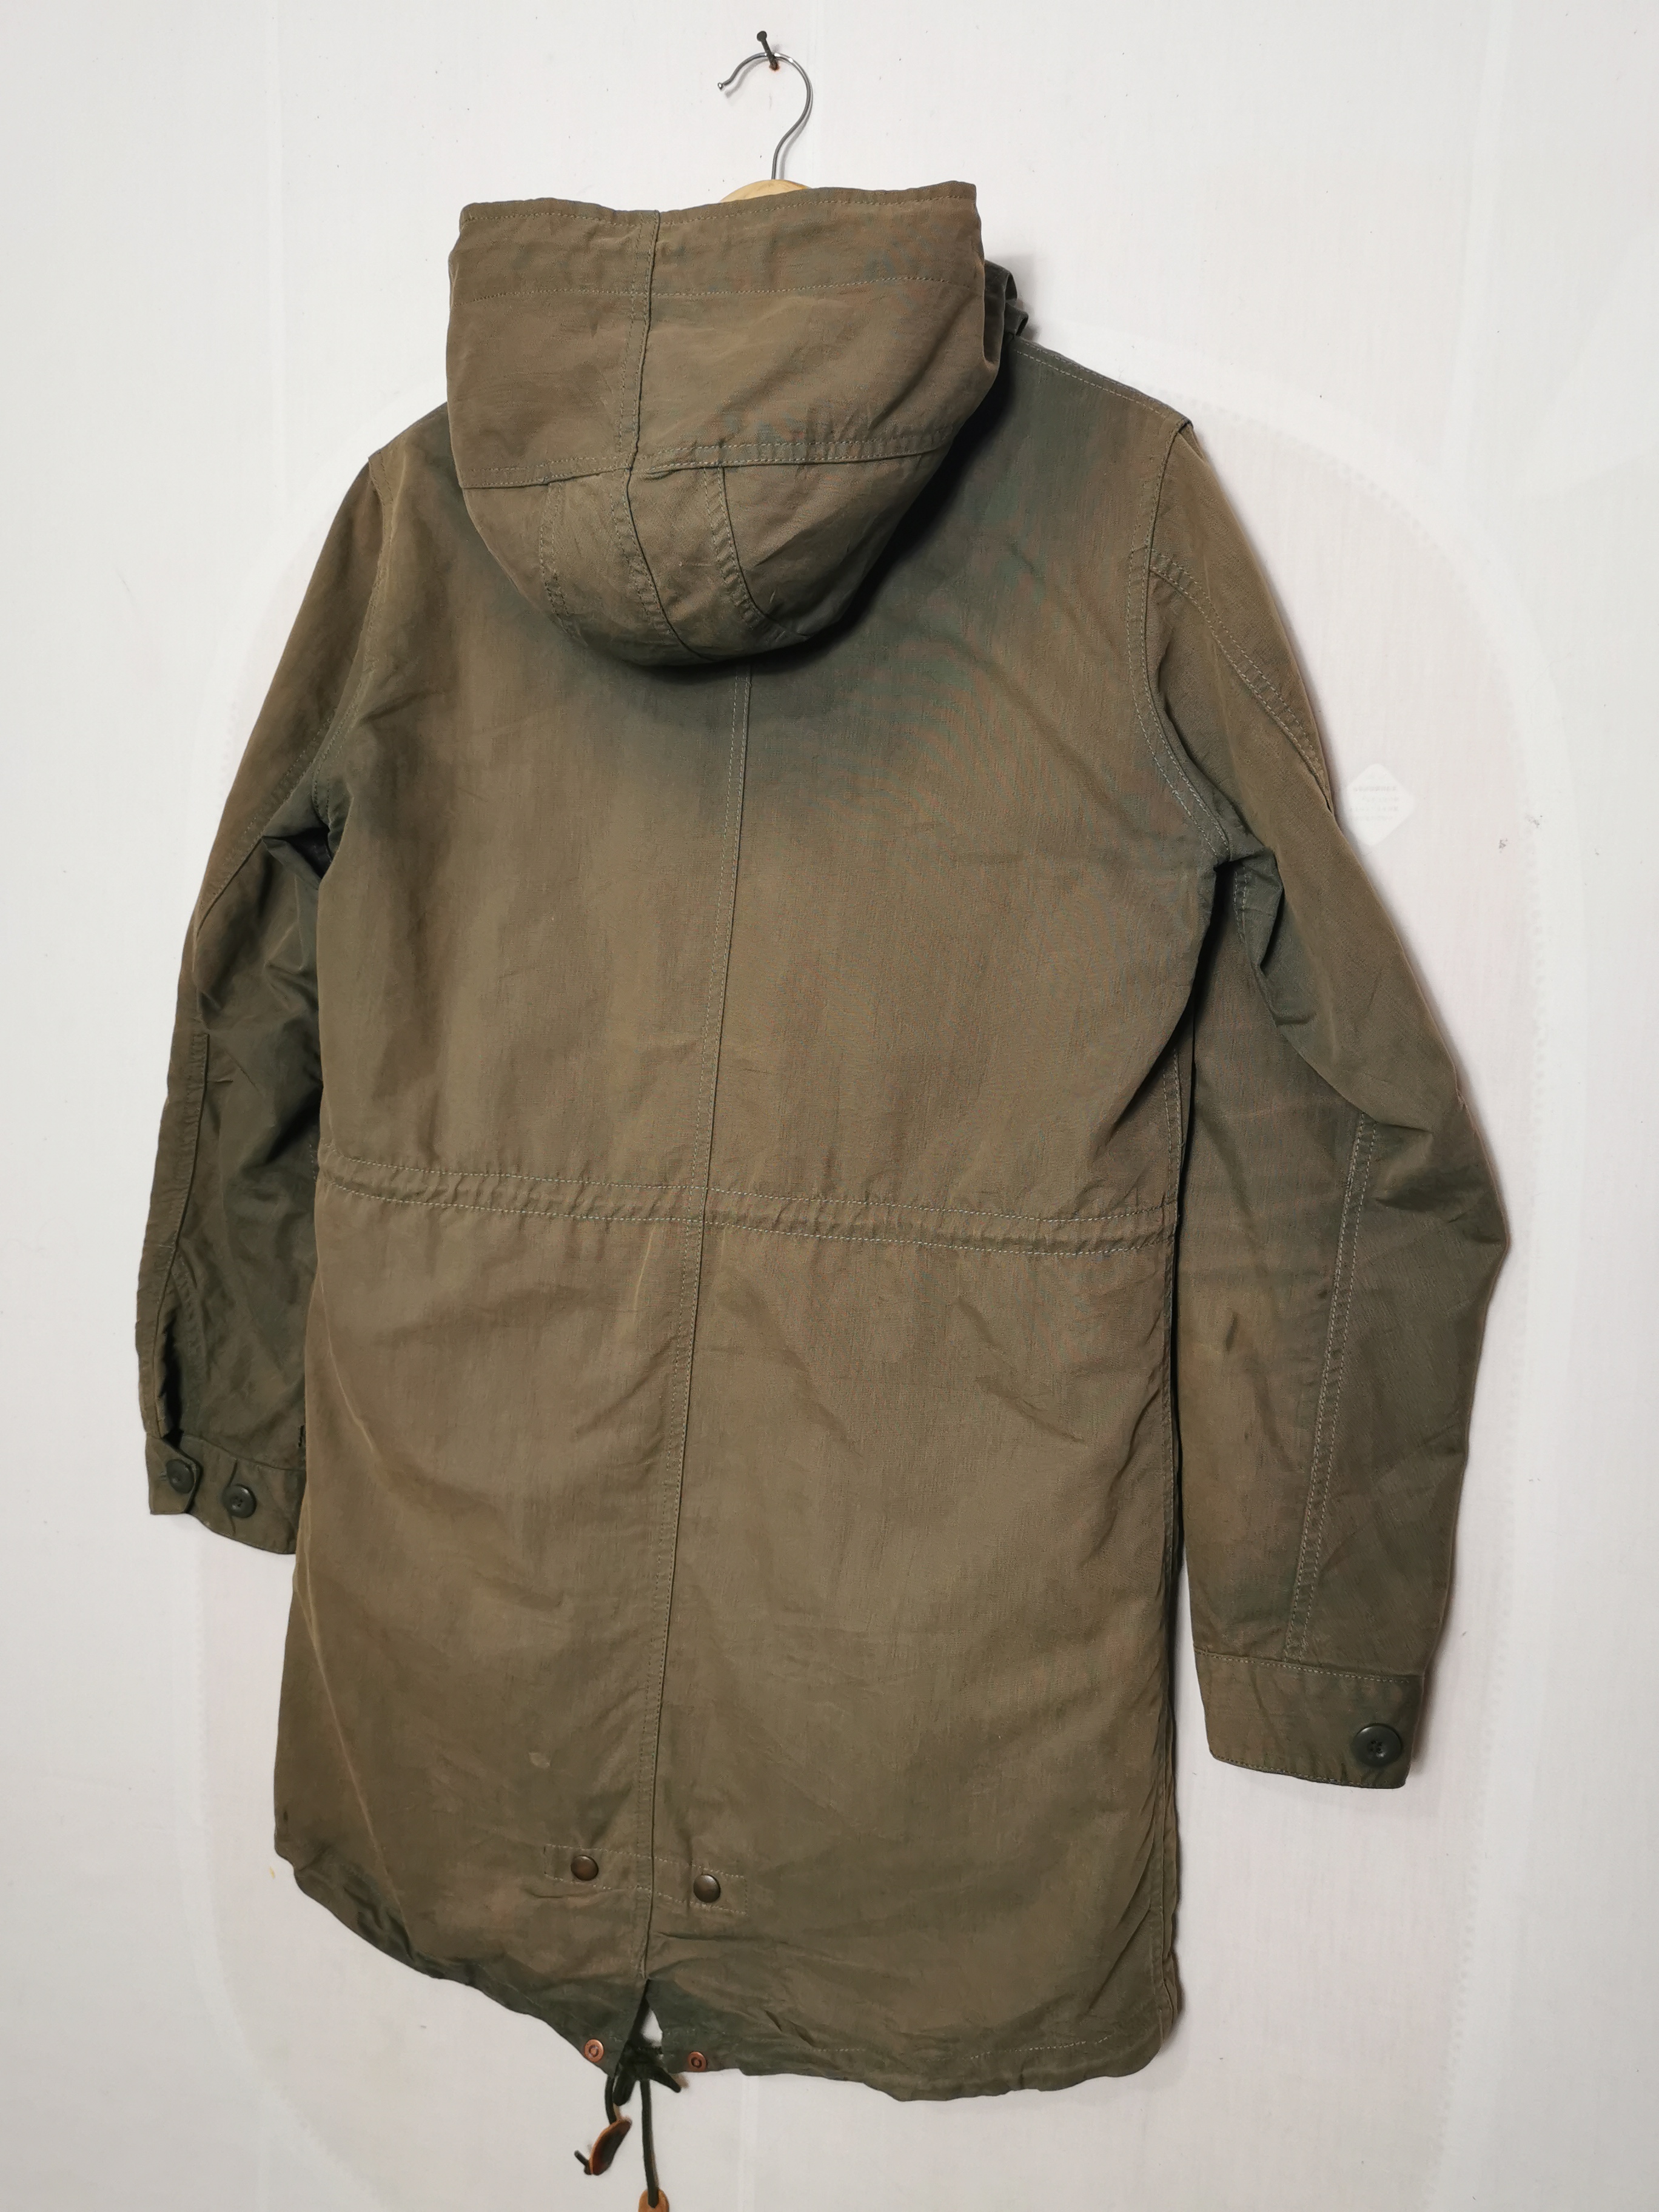 Fred Perry Fishtail Parka Jacket Great Britain Sherpa - 15